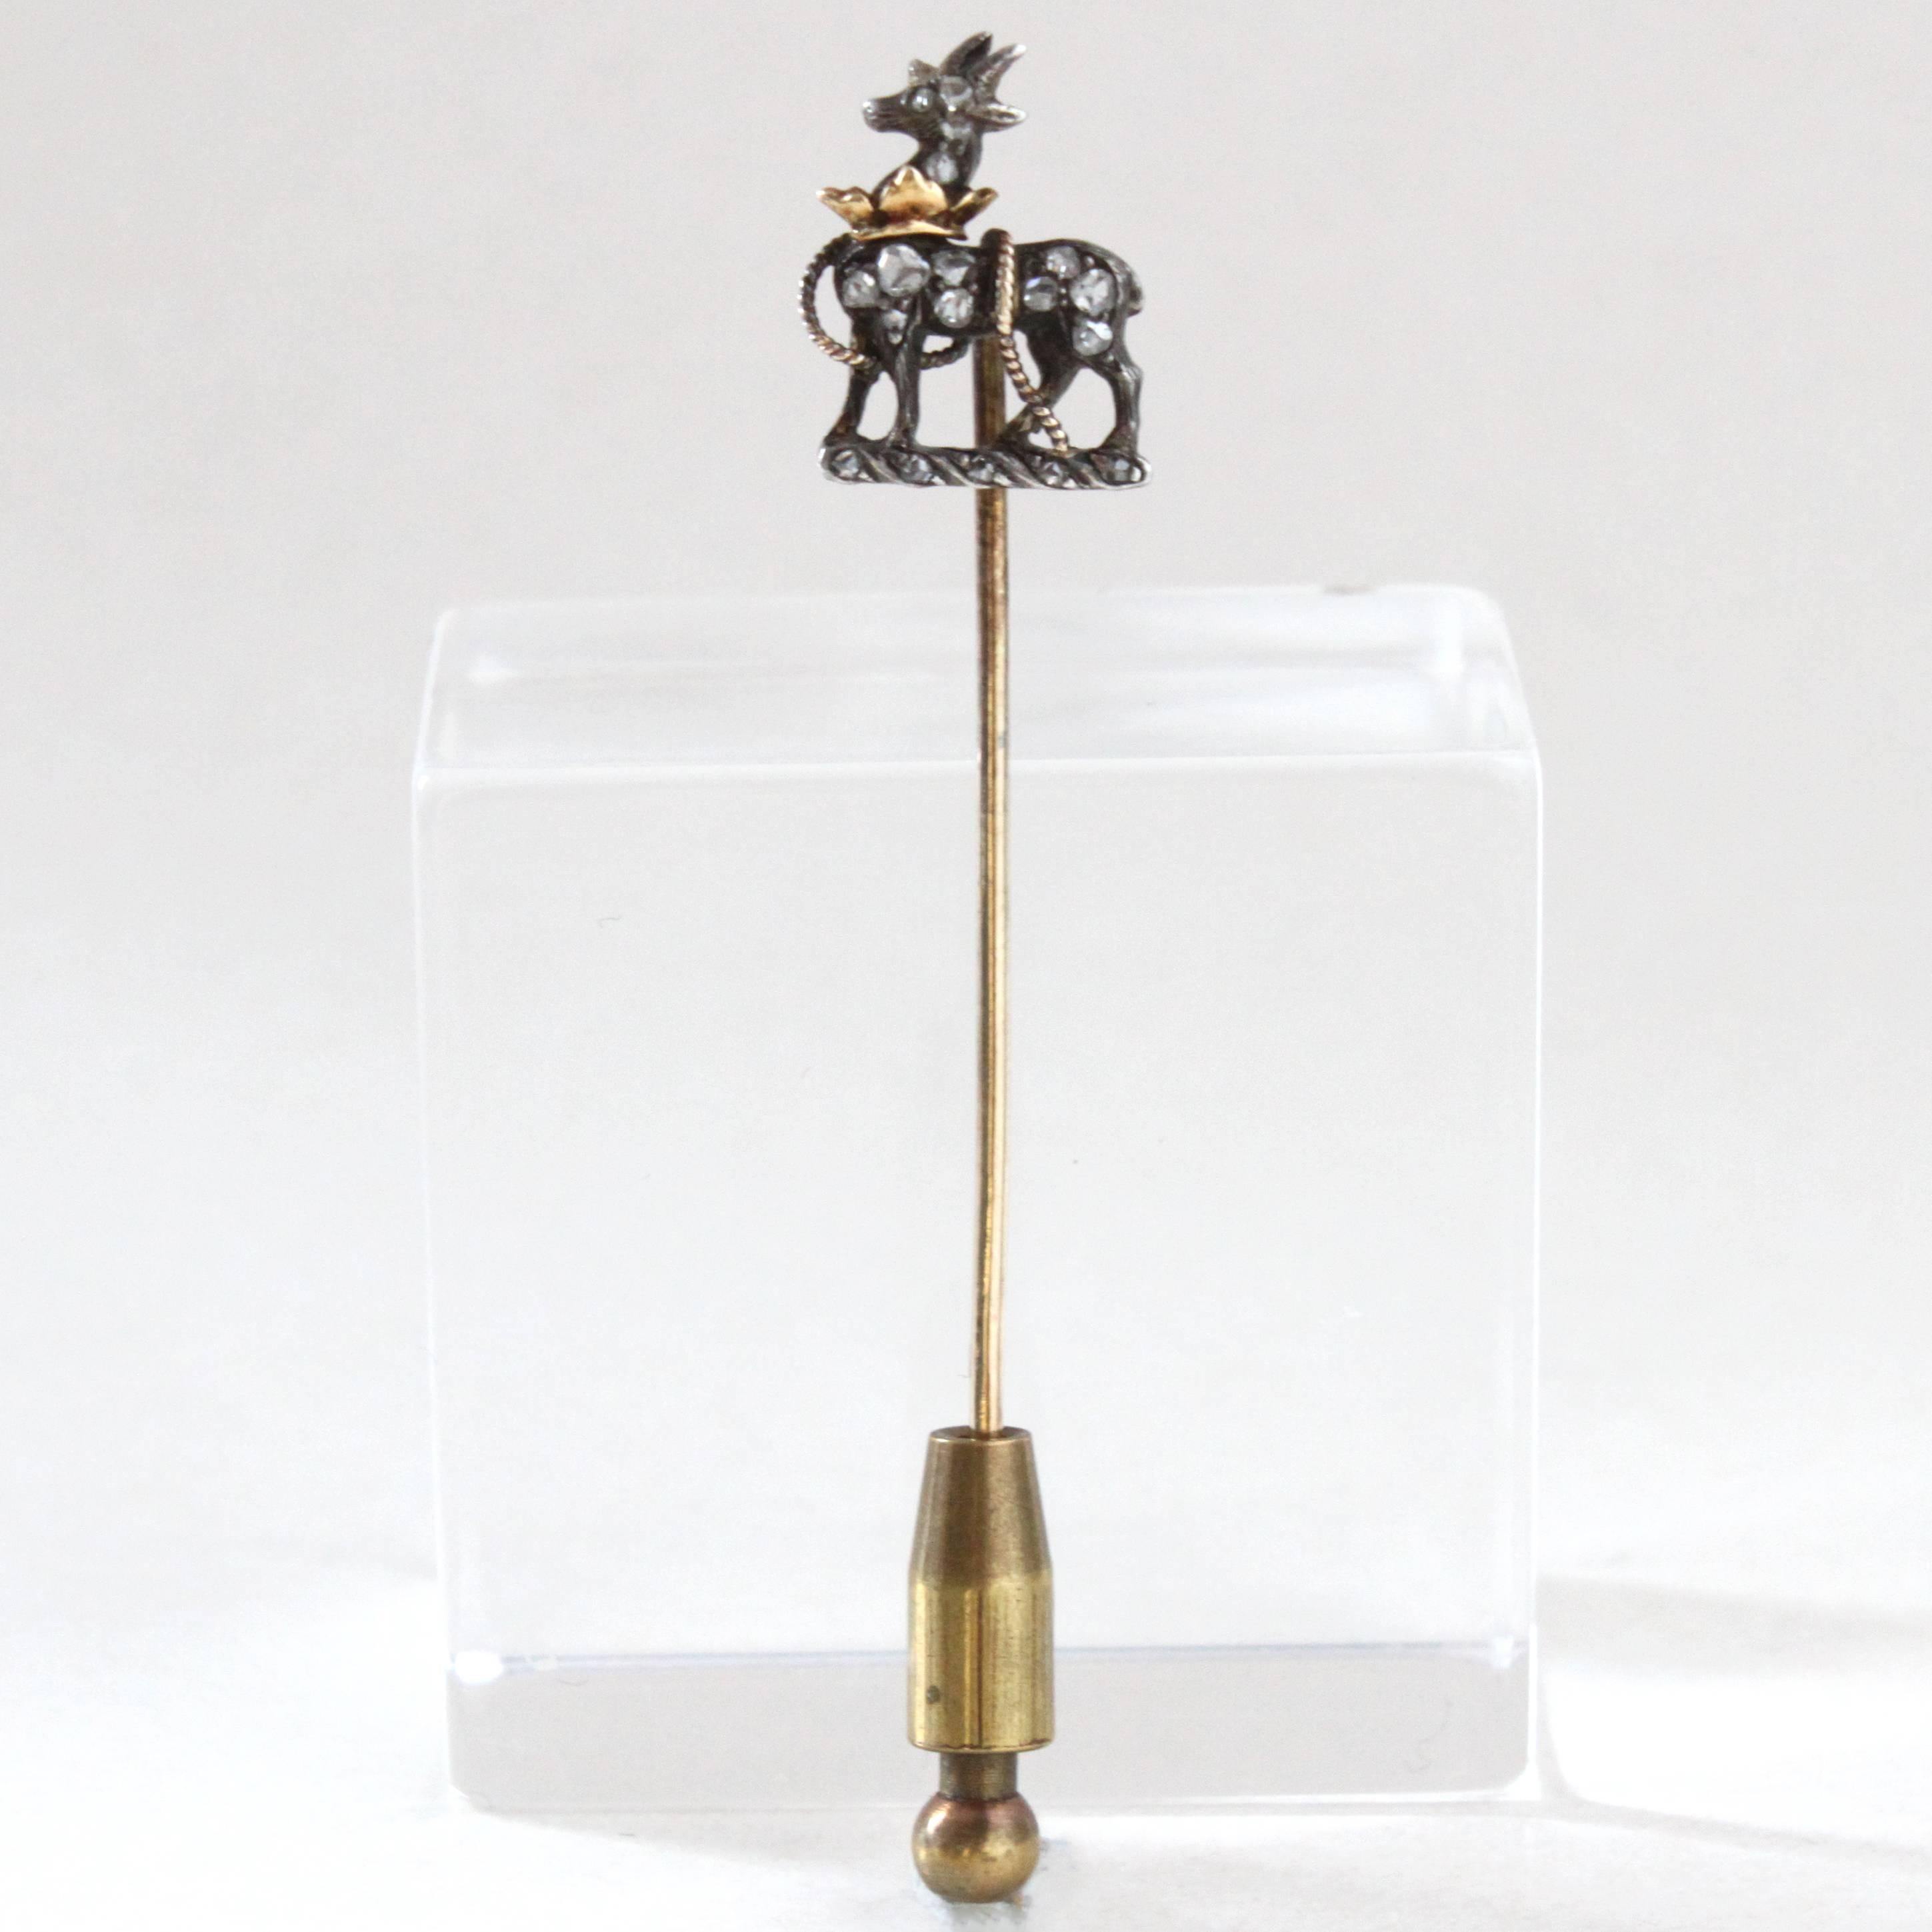 A Victorian Diamond Stag Stick Pin with beautiful details, ca. 1890s.

The motif depicts a stag wearing a gold crown on its neck and tied with gold-ropes around its body. The body itself is studded with rose-cut diamonds.

